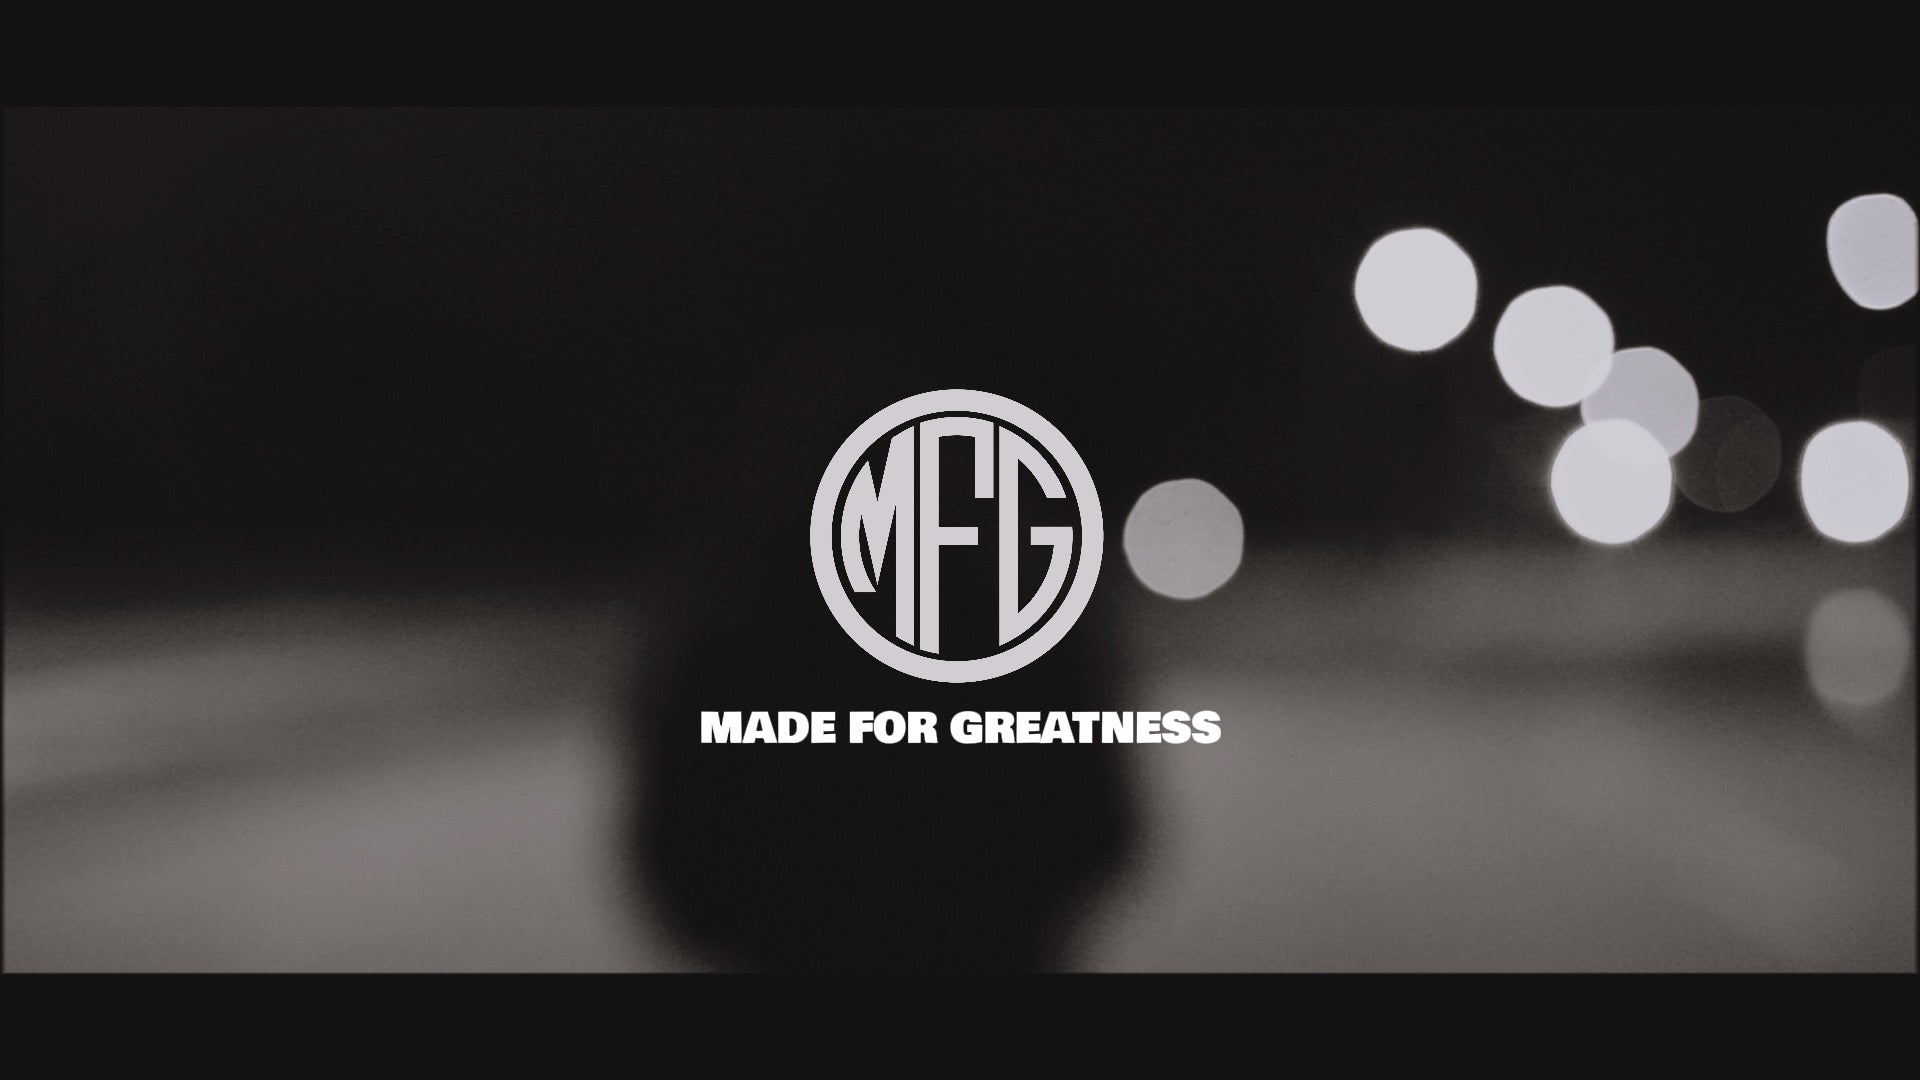 Load video: You’re made for greatness @Trickyslens Visit our website: https://www.mitchsfitgear.com/?ref=MFG